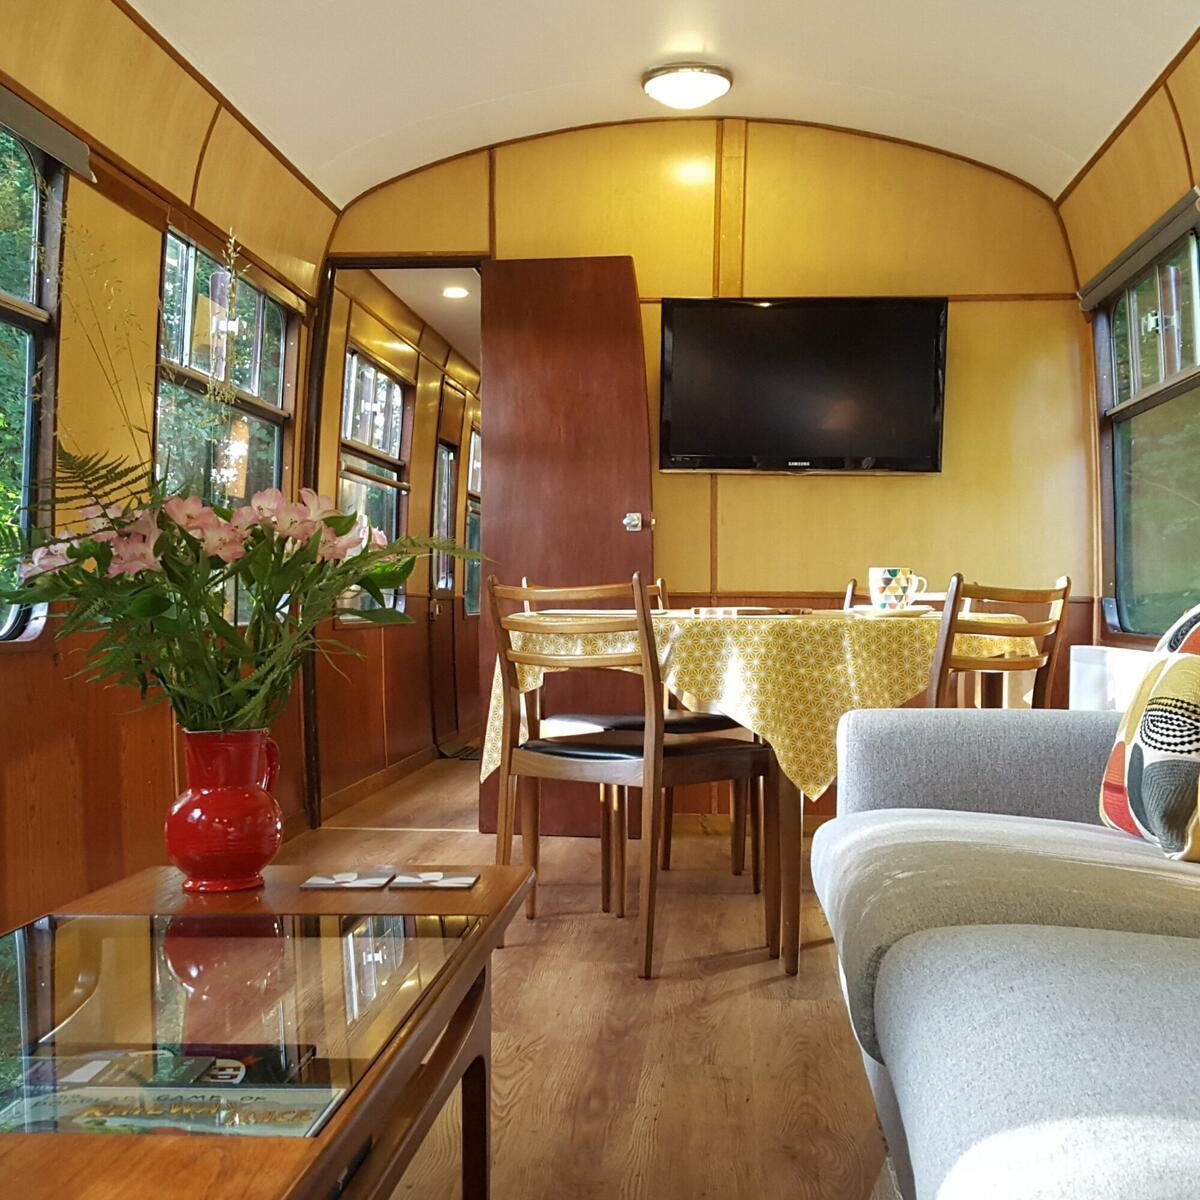 The Saloon Coach Lounge and Diner